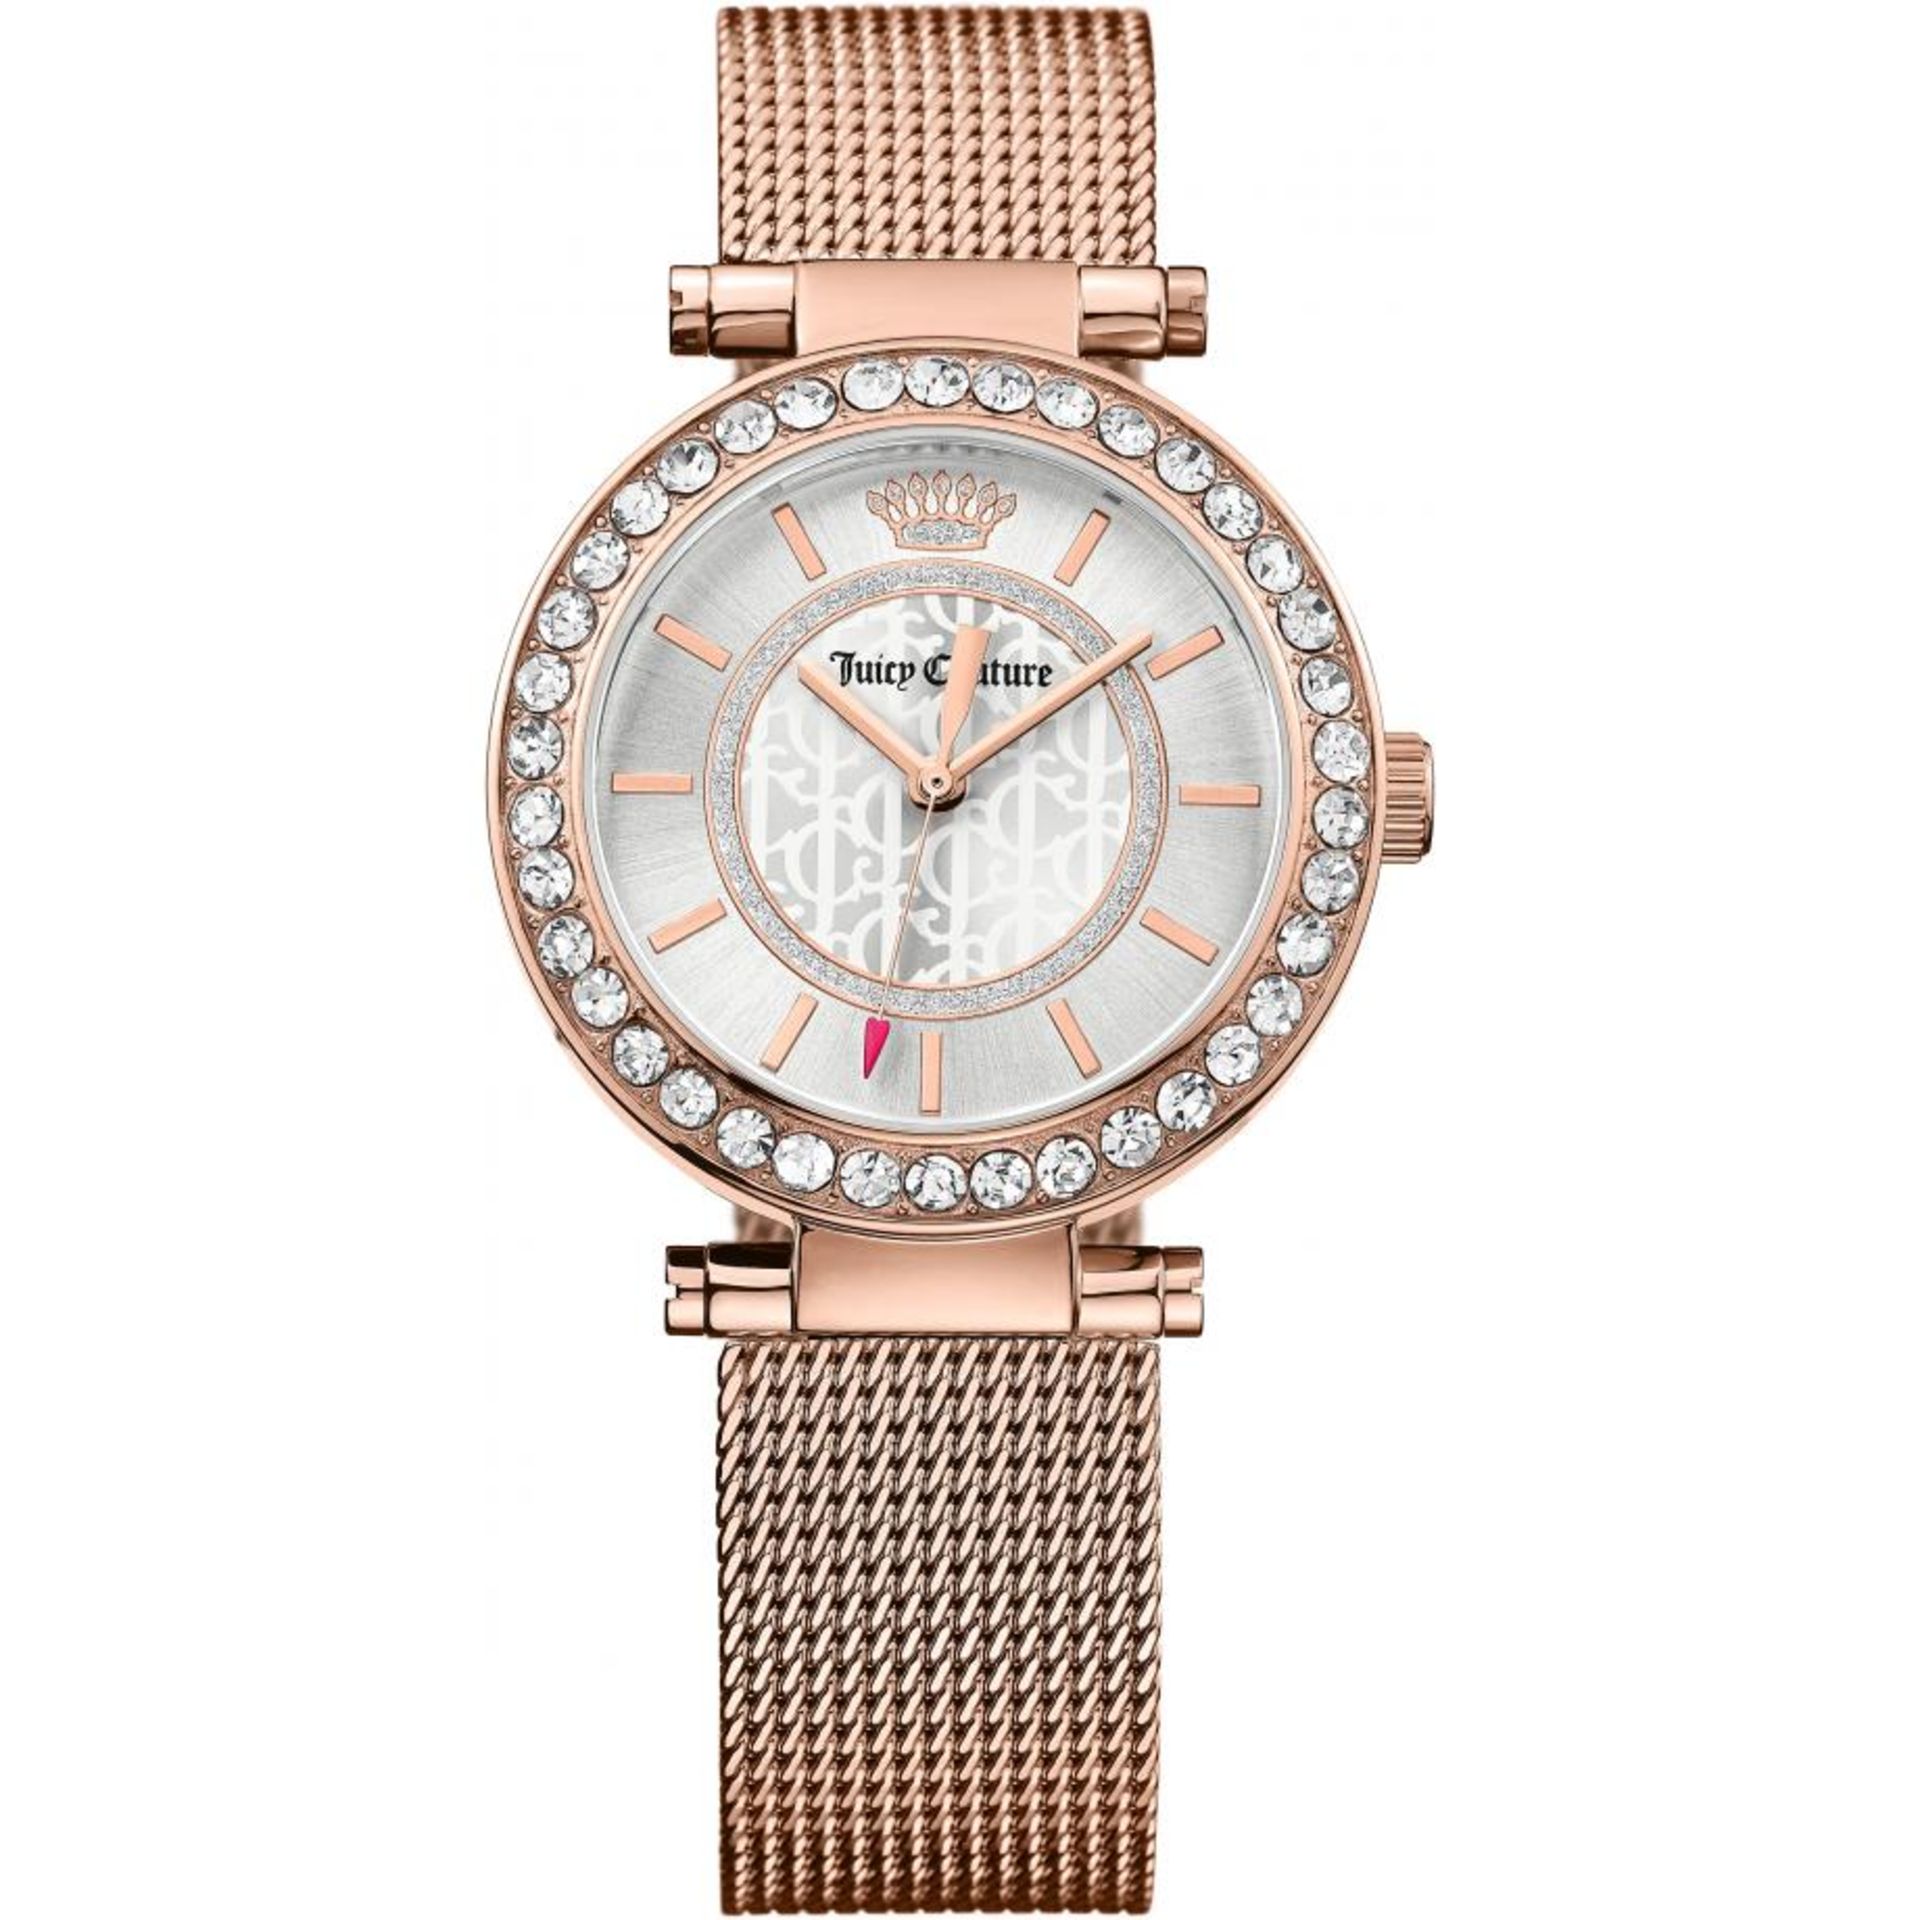 BRAND NEW JUICY COUTURE LADIES WRIST WATCH WITH 2 YEARS INTERNATIONAL WARRANTY (1901374)